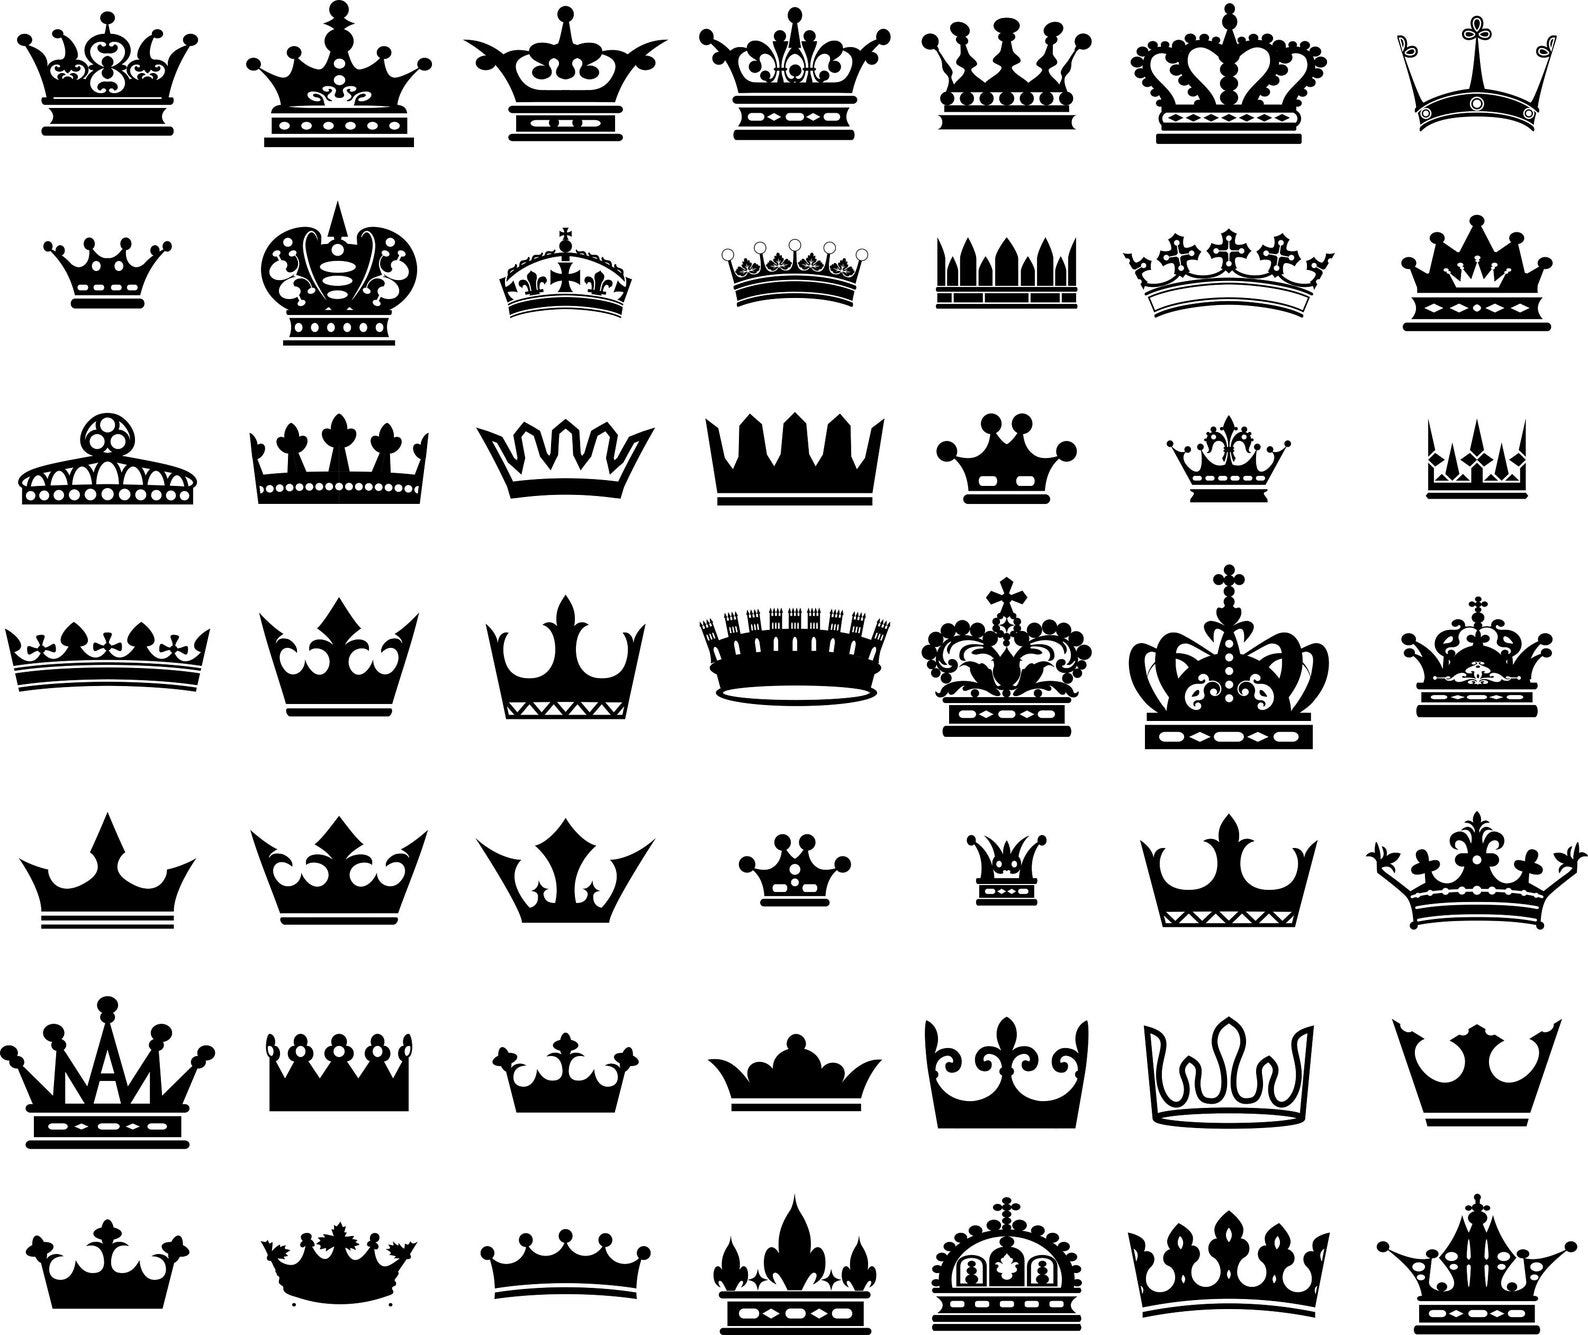 Nice crowns for your collection.